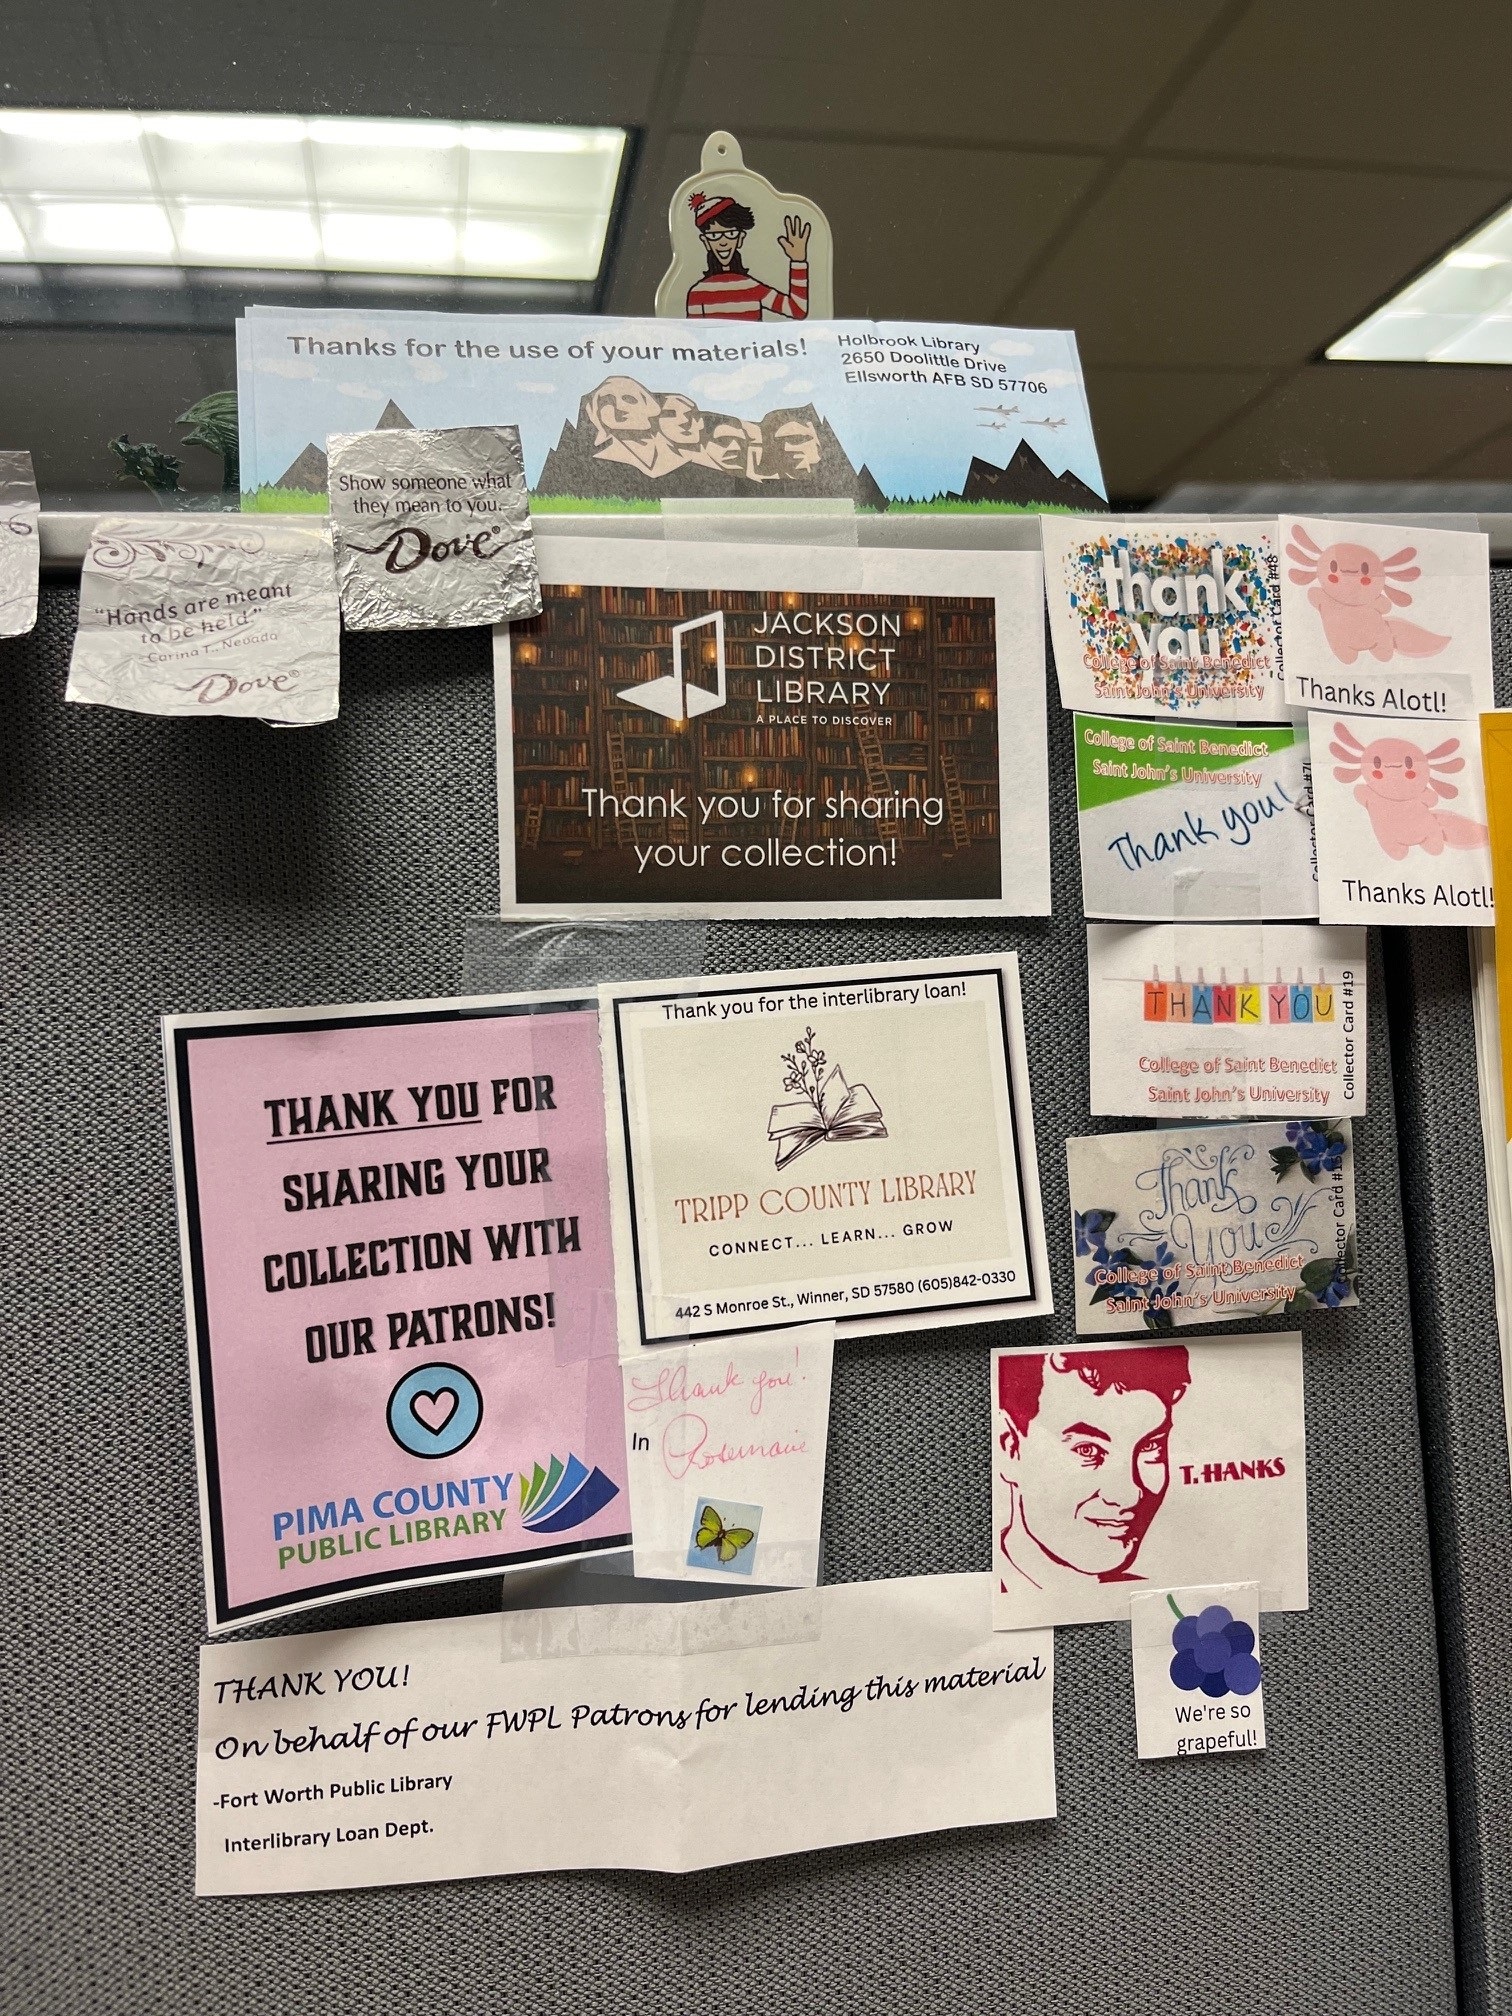 Thank-you notes from libraries around the country